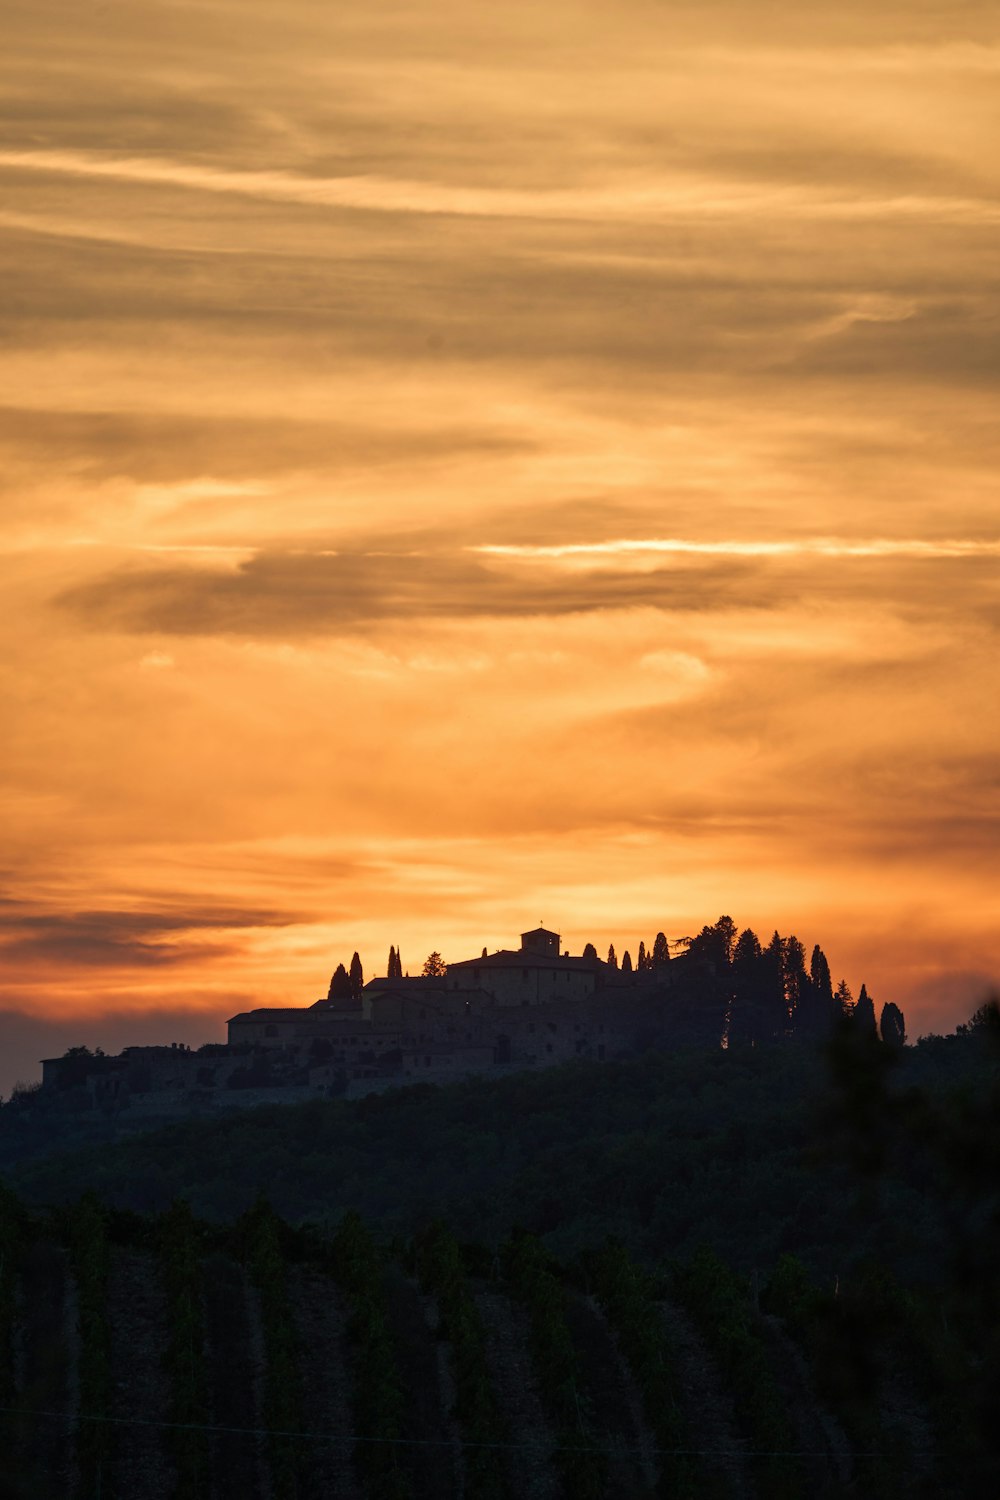 a sunset view of a castle on top of a hill